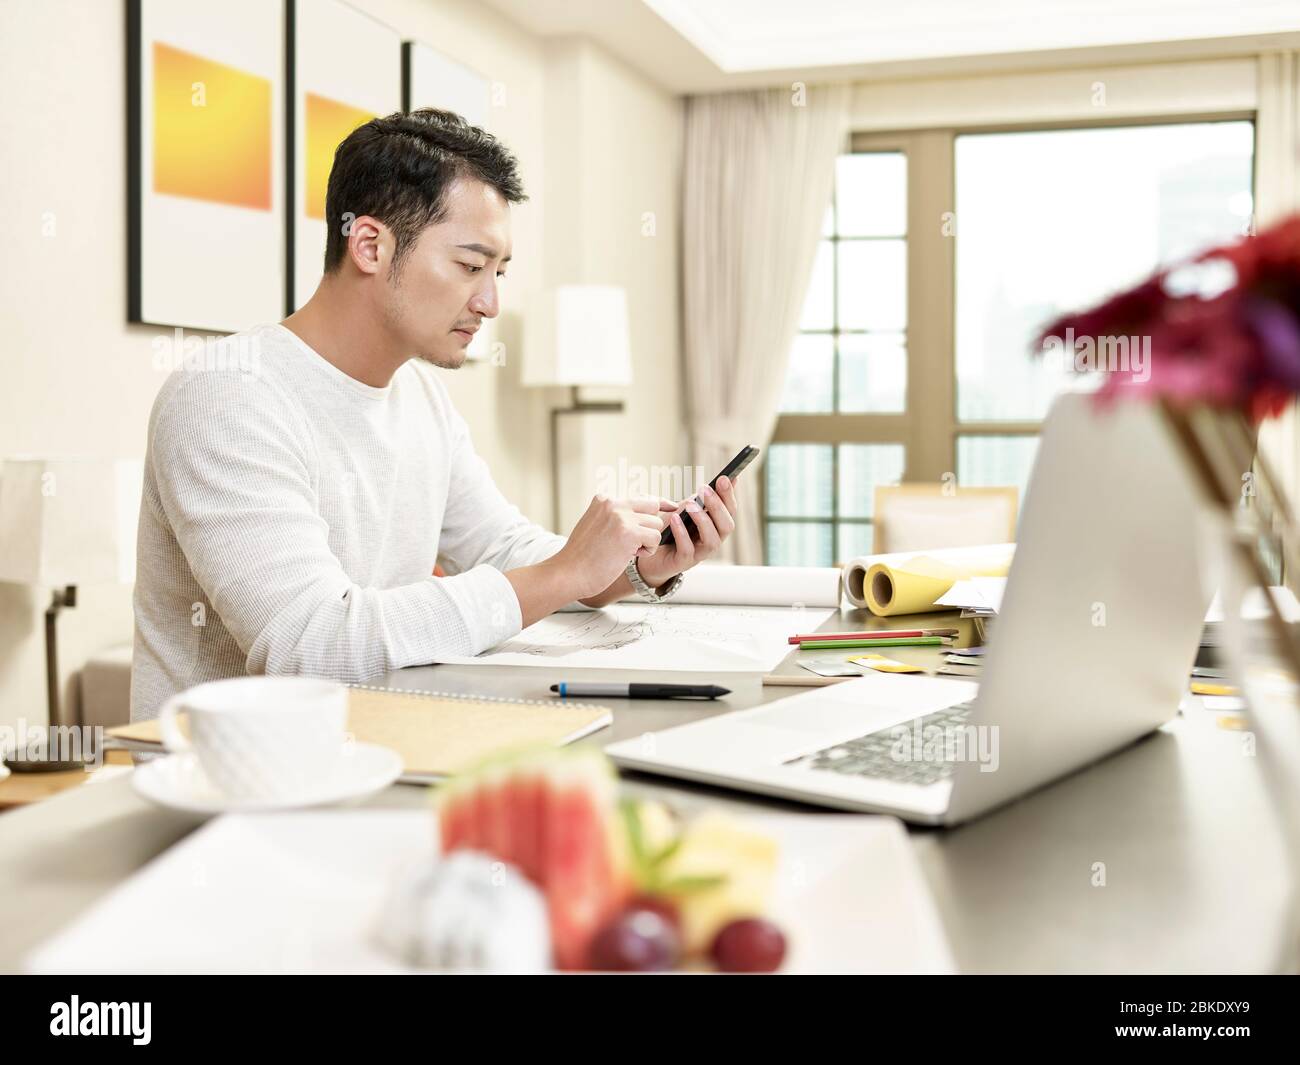 young asian man design professional working from home sitting at kitchen using cellphone (artwork in background digitally altered) Stock Photo